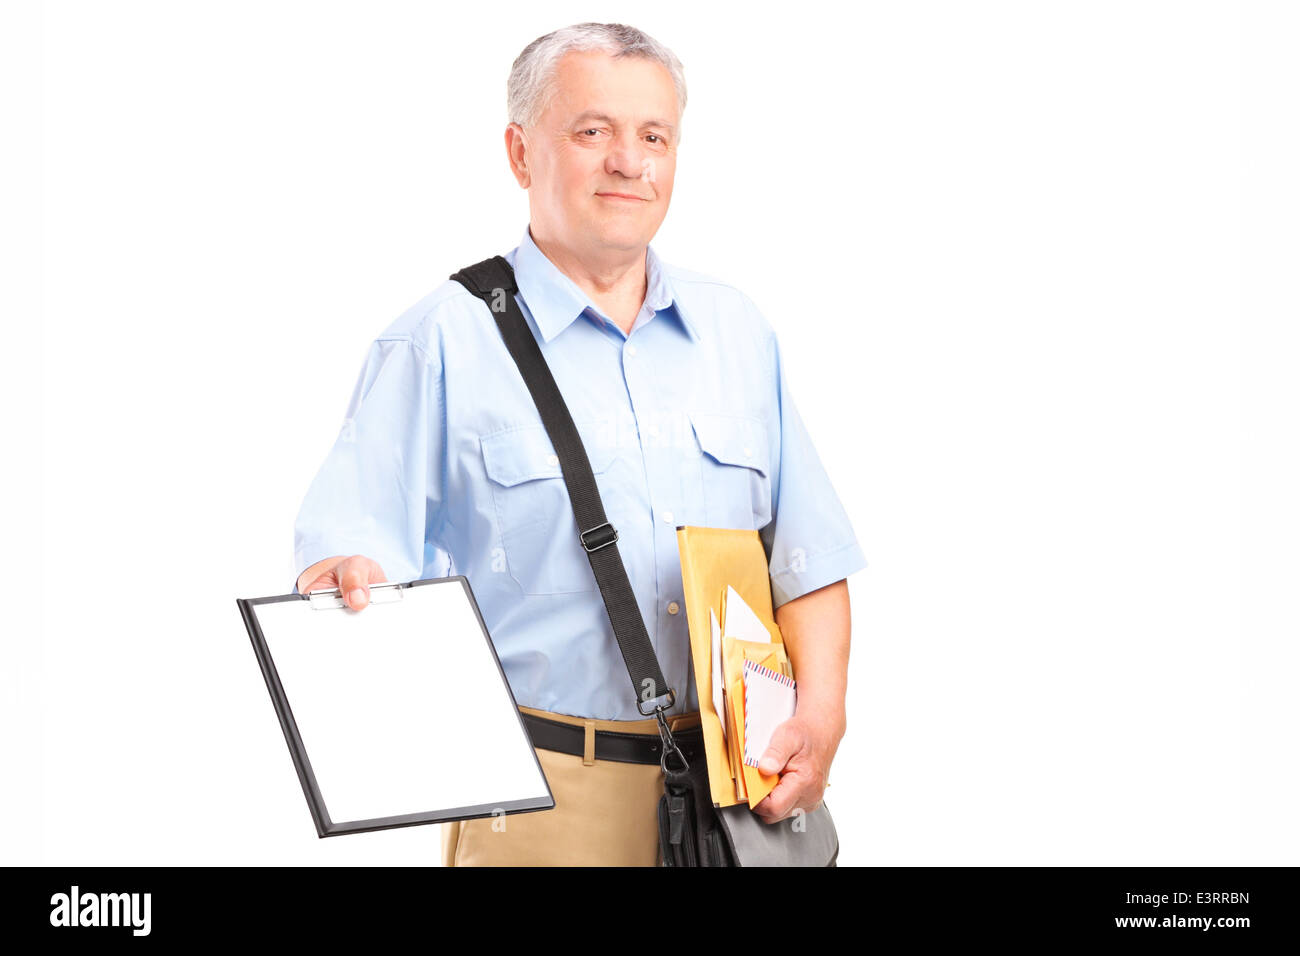 Mailman holding clipboard and bunch of envelopes Stock Photo